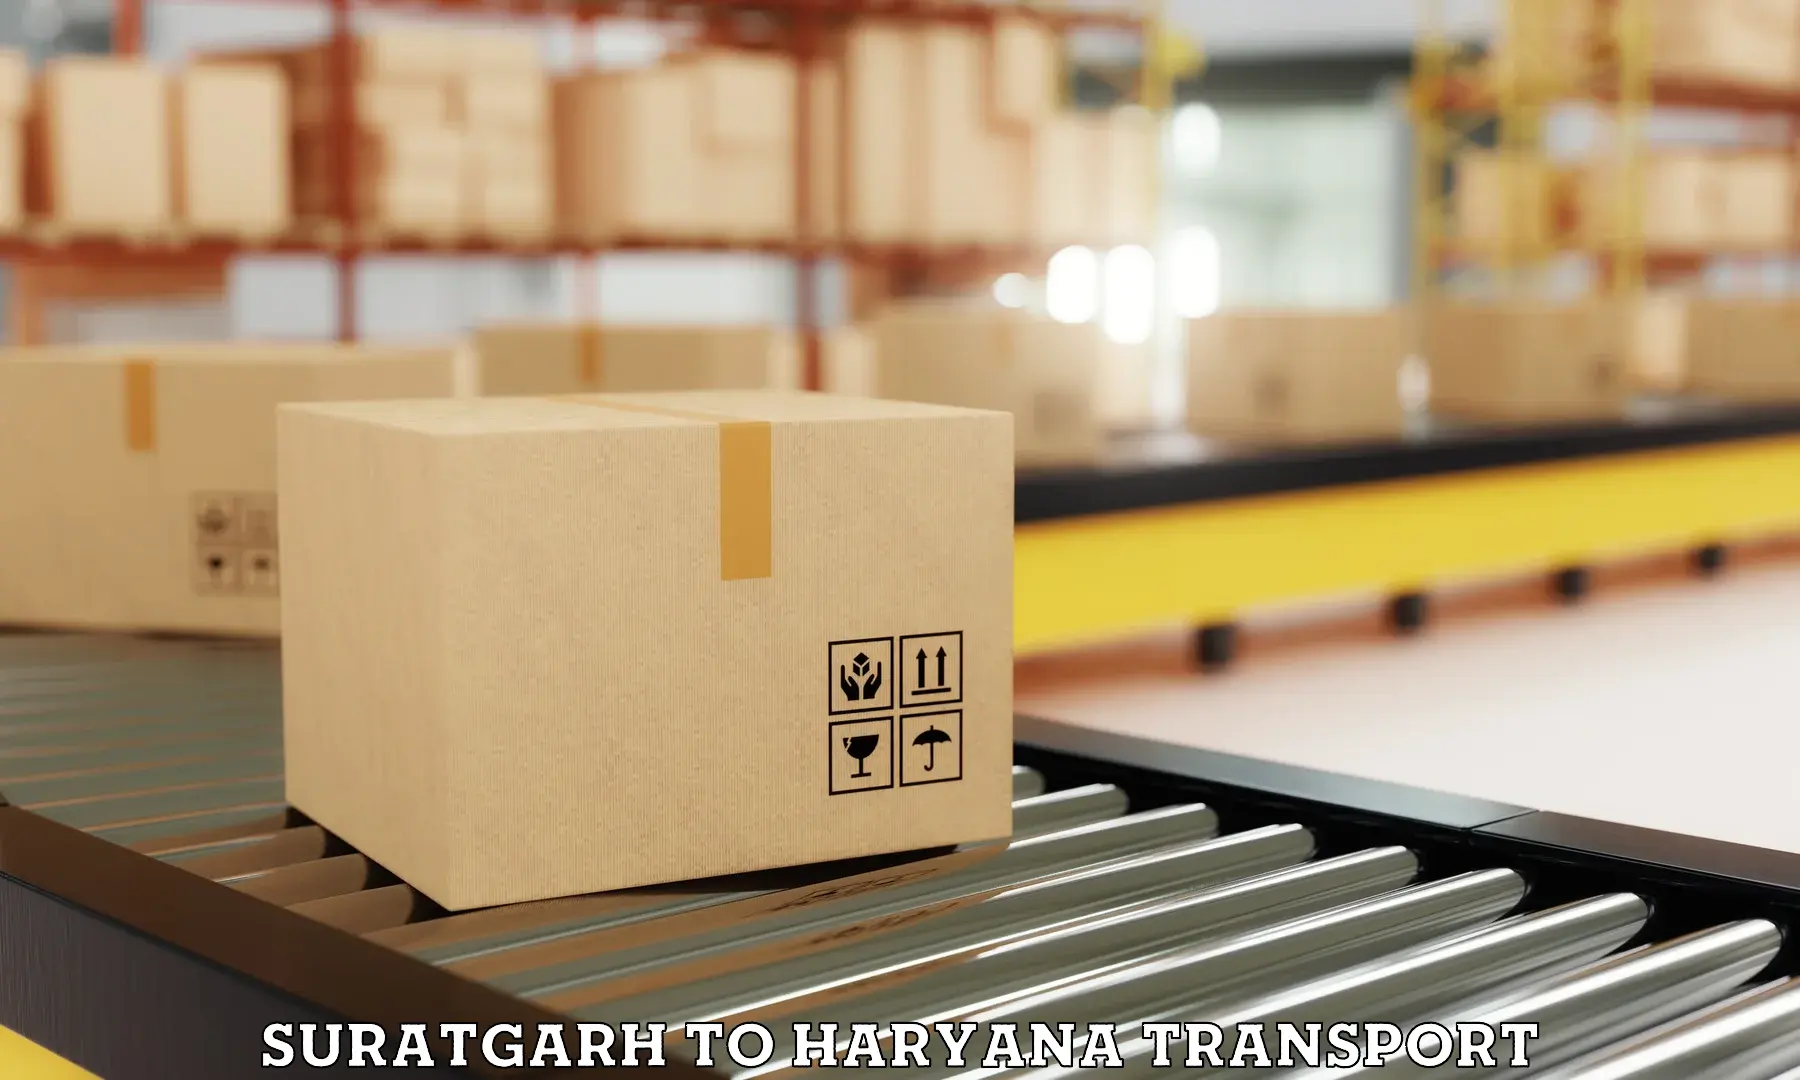 Air freight transport services Suratgarh to NCR Haryana